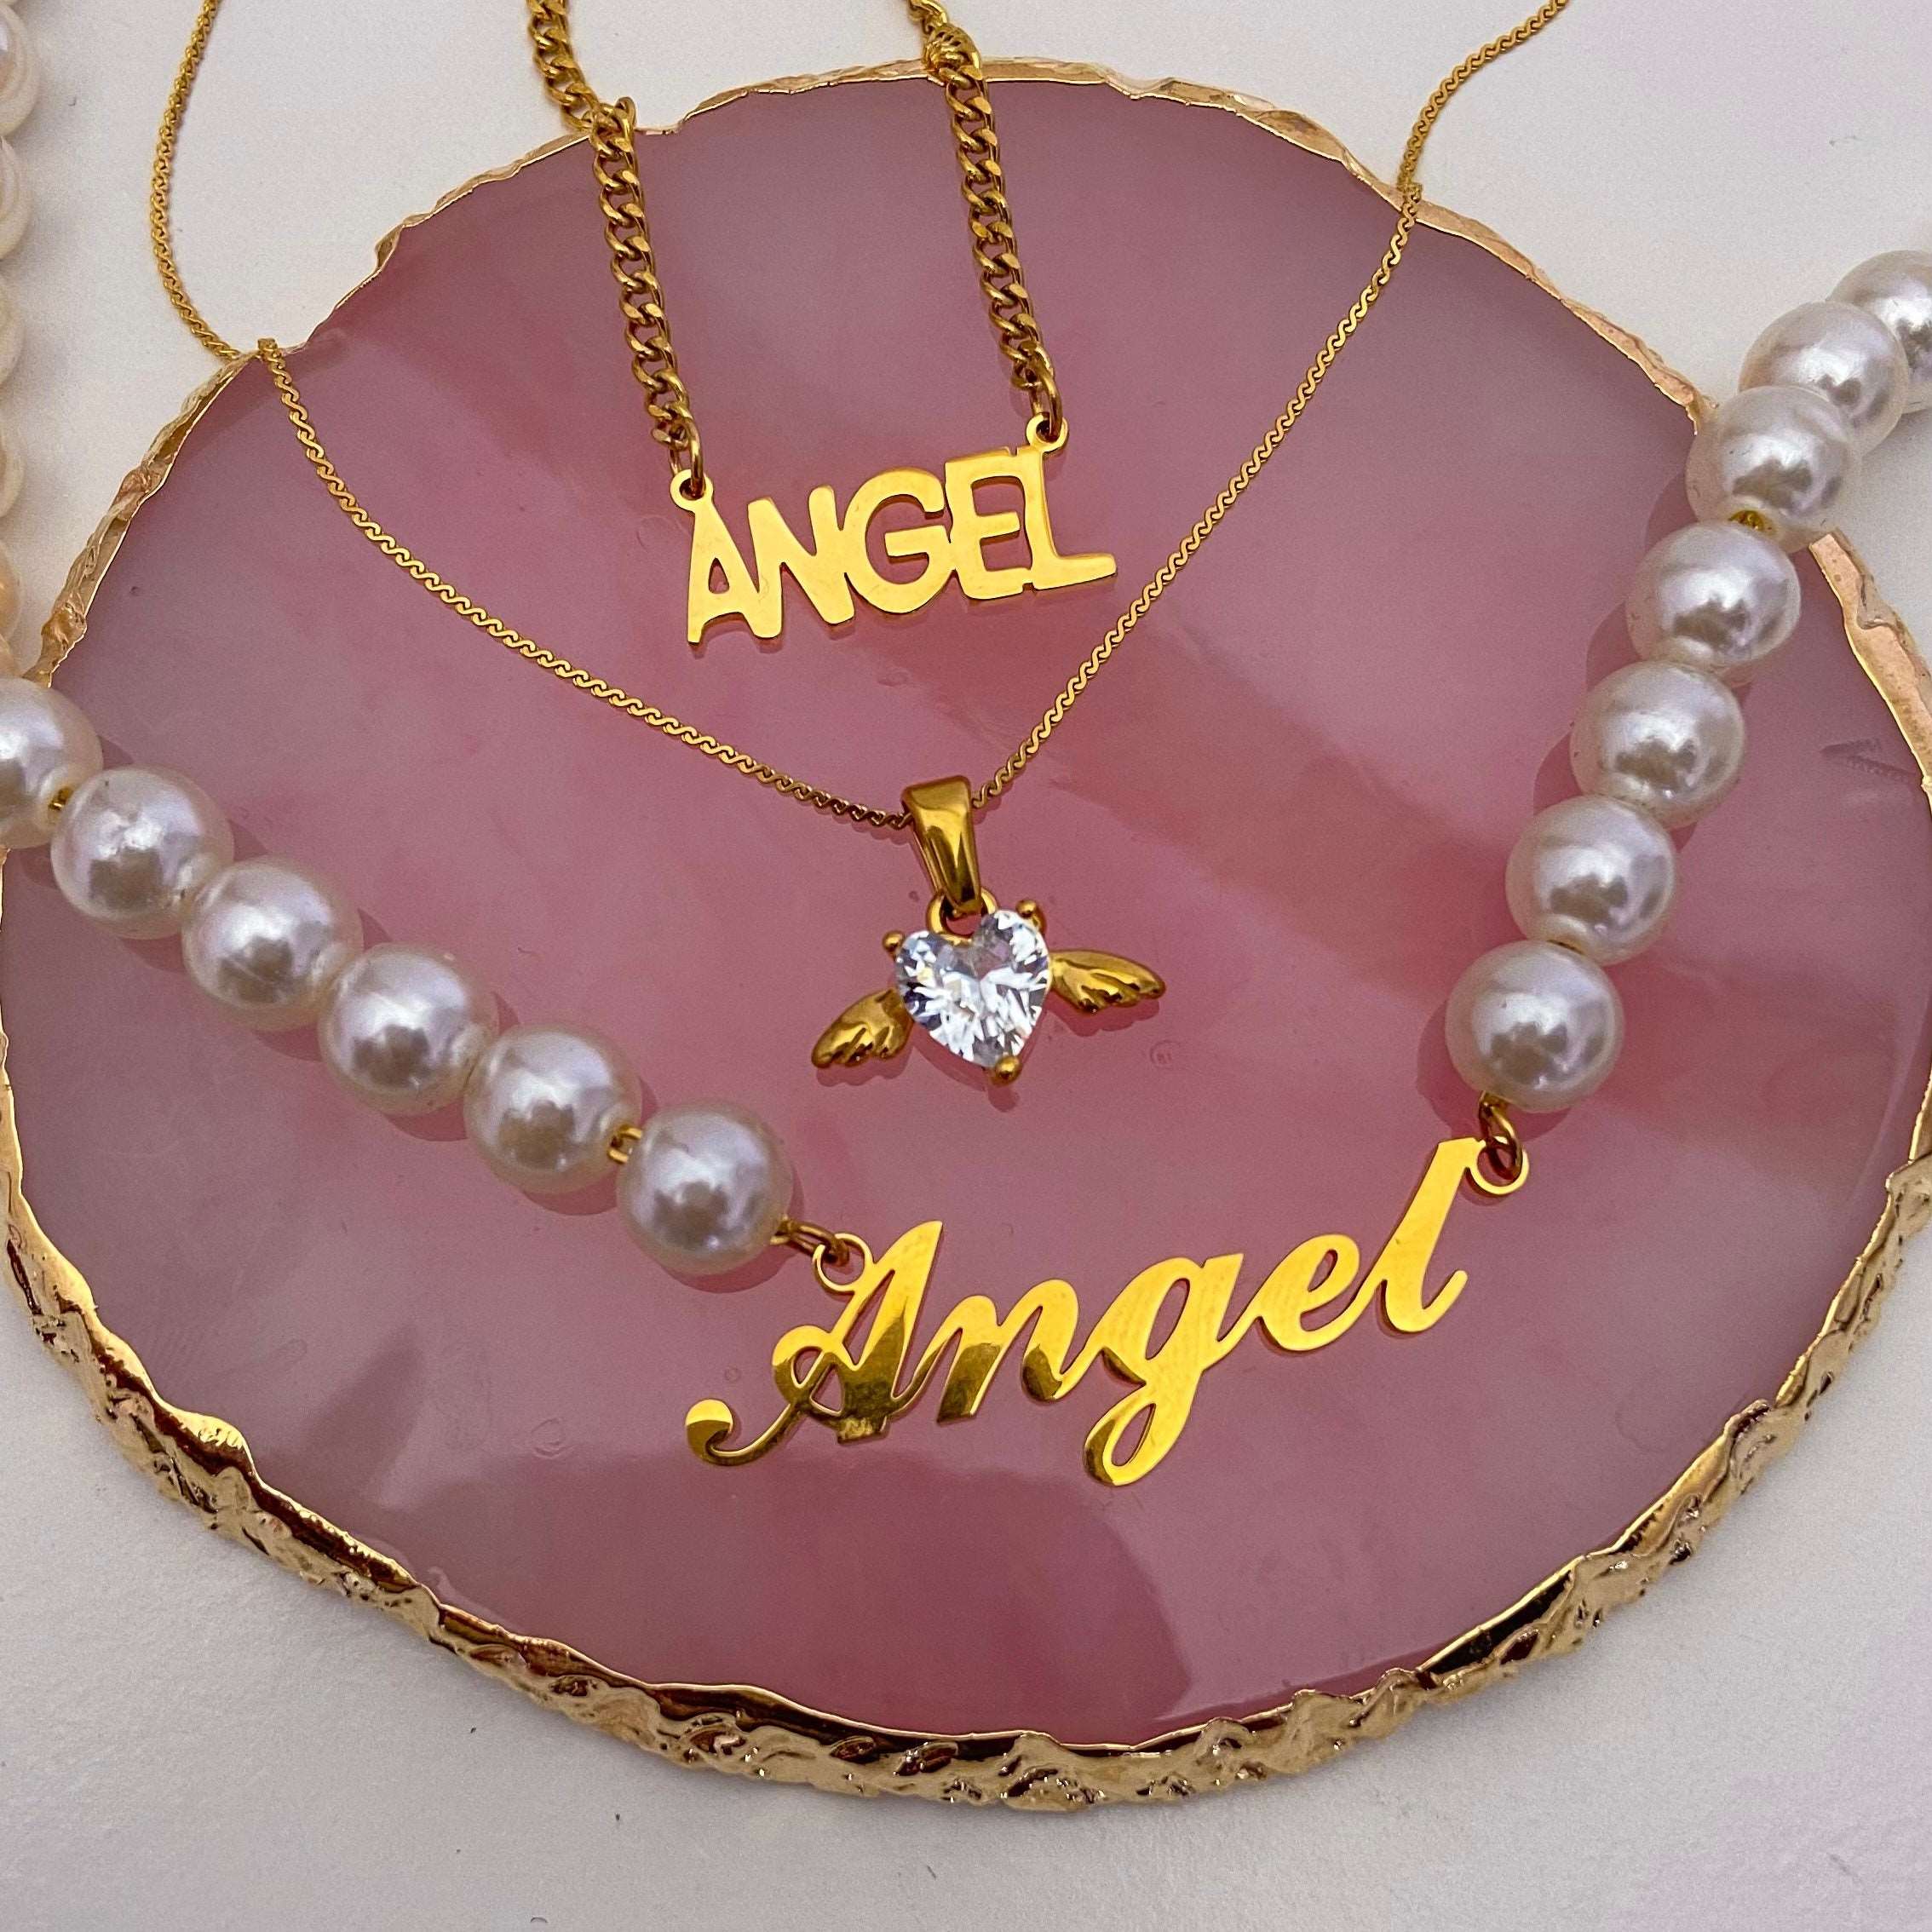 Angel Energy Necklace